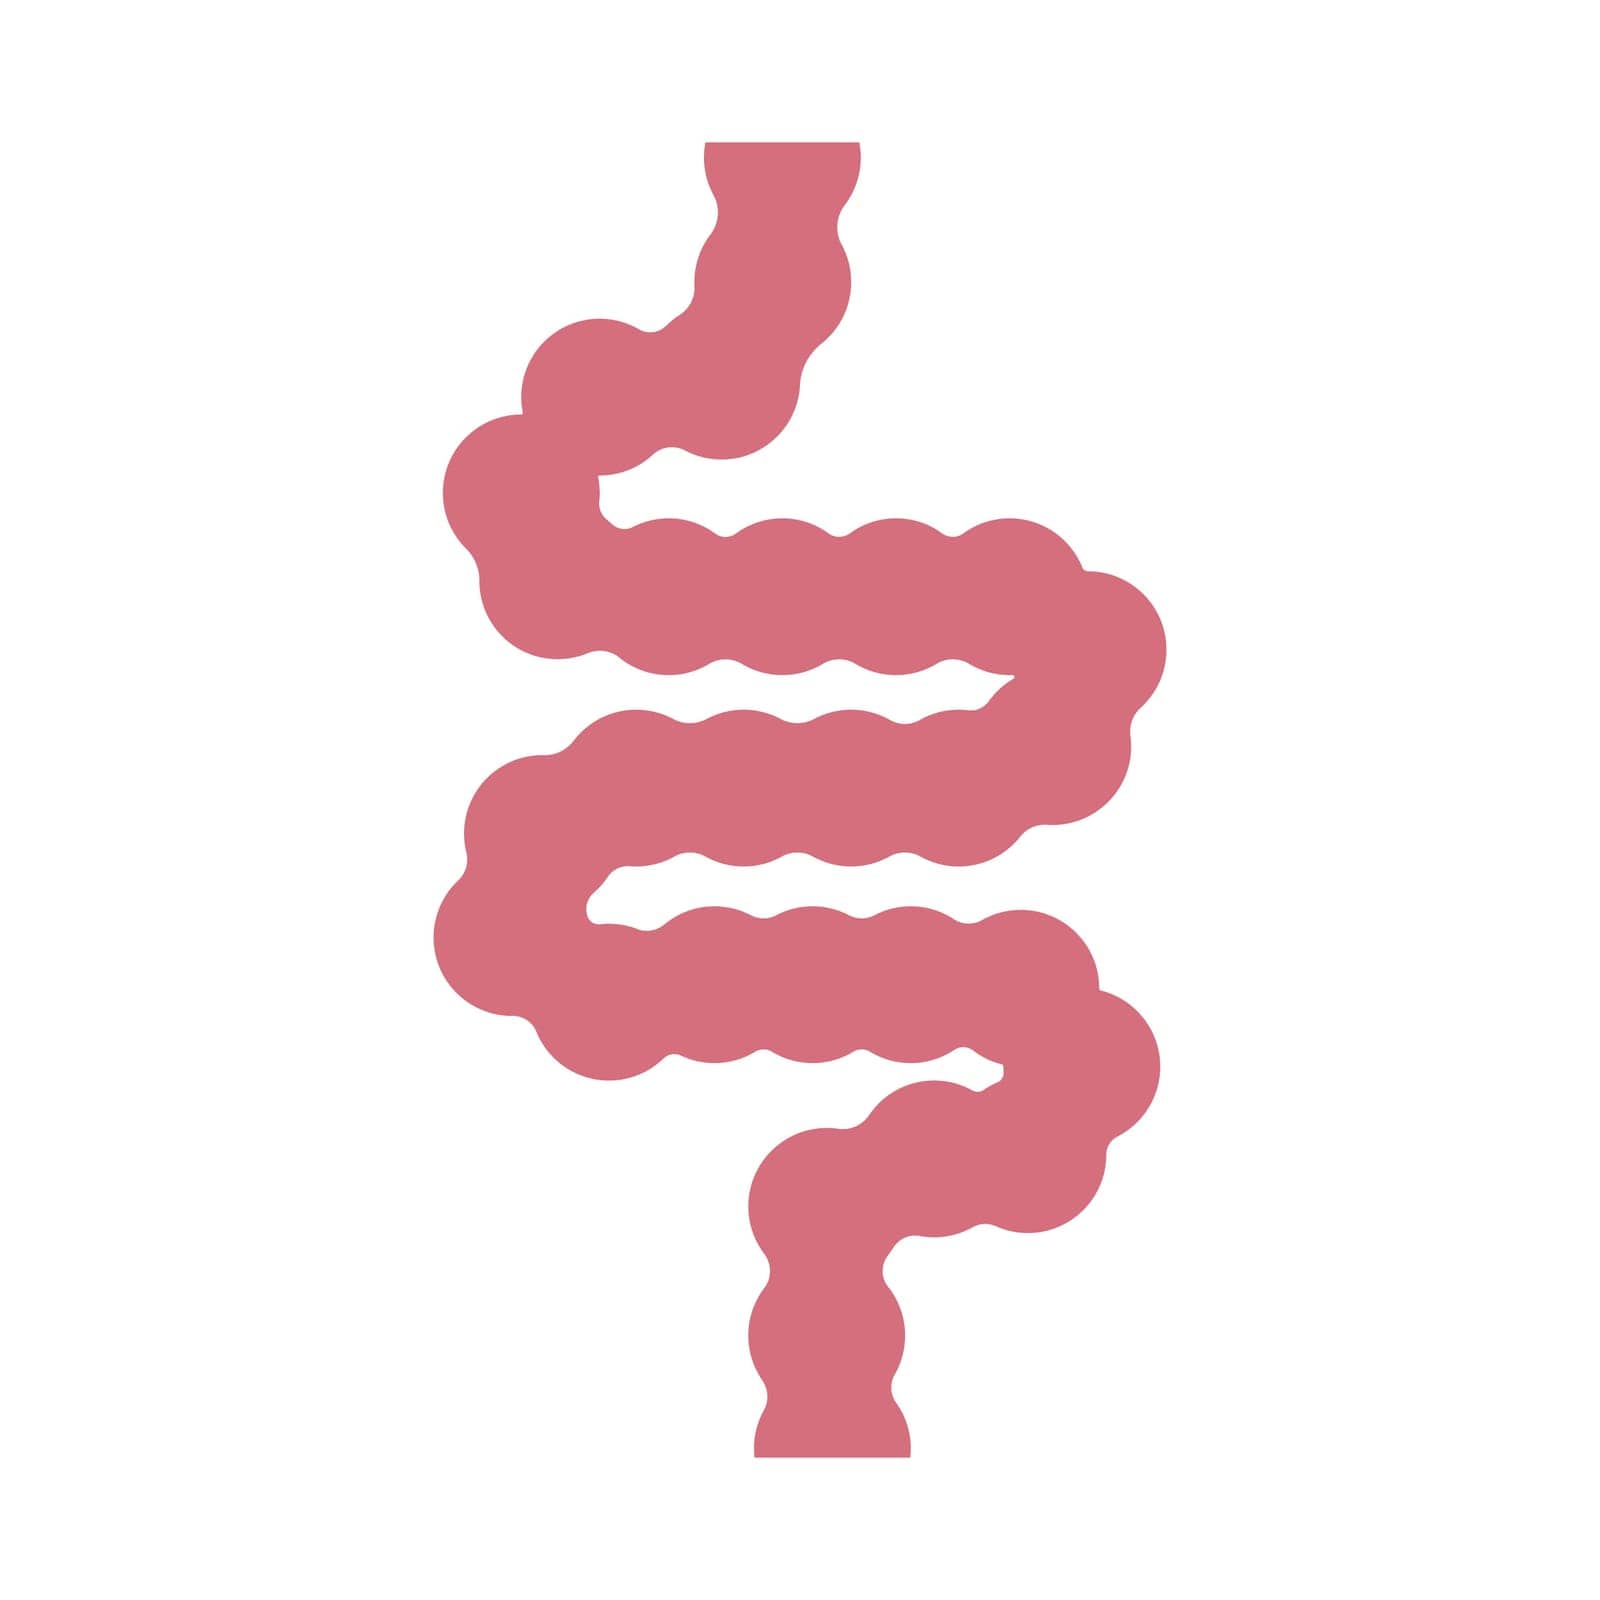 intestine simple icon by rnking